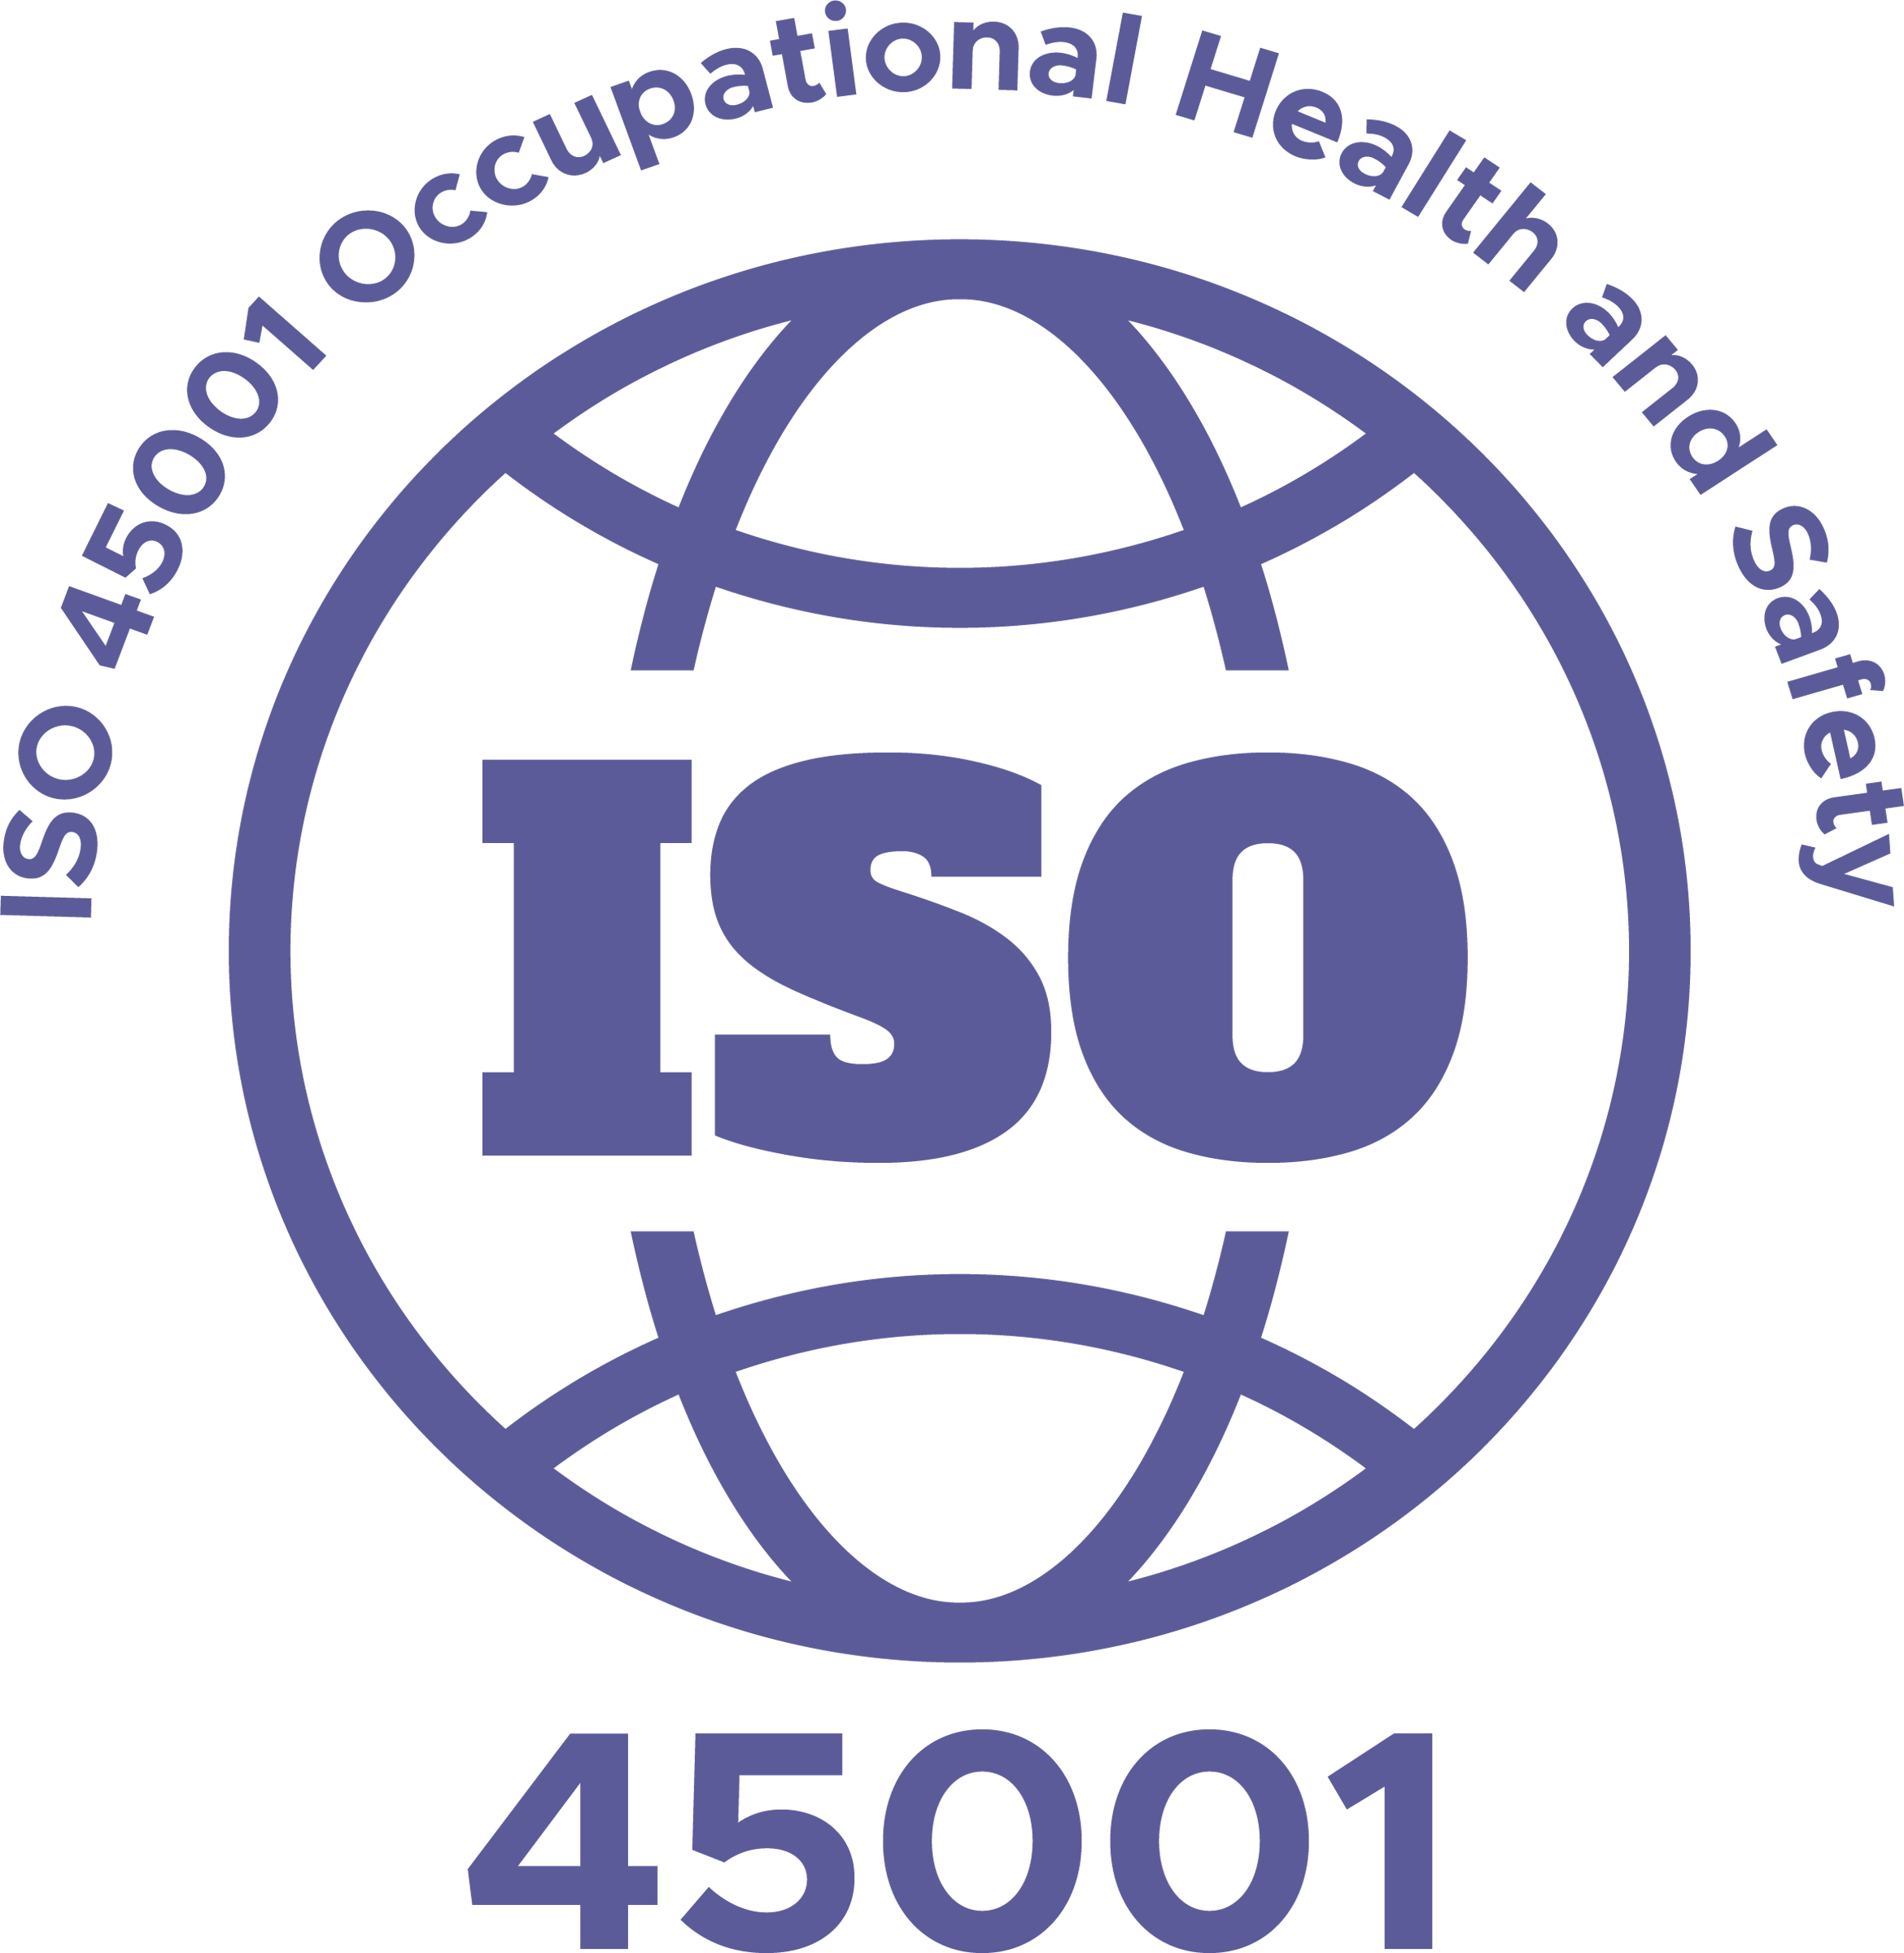 Iso 45001 Template Free Download